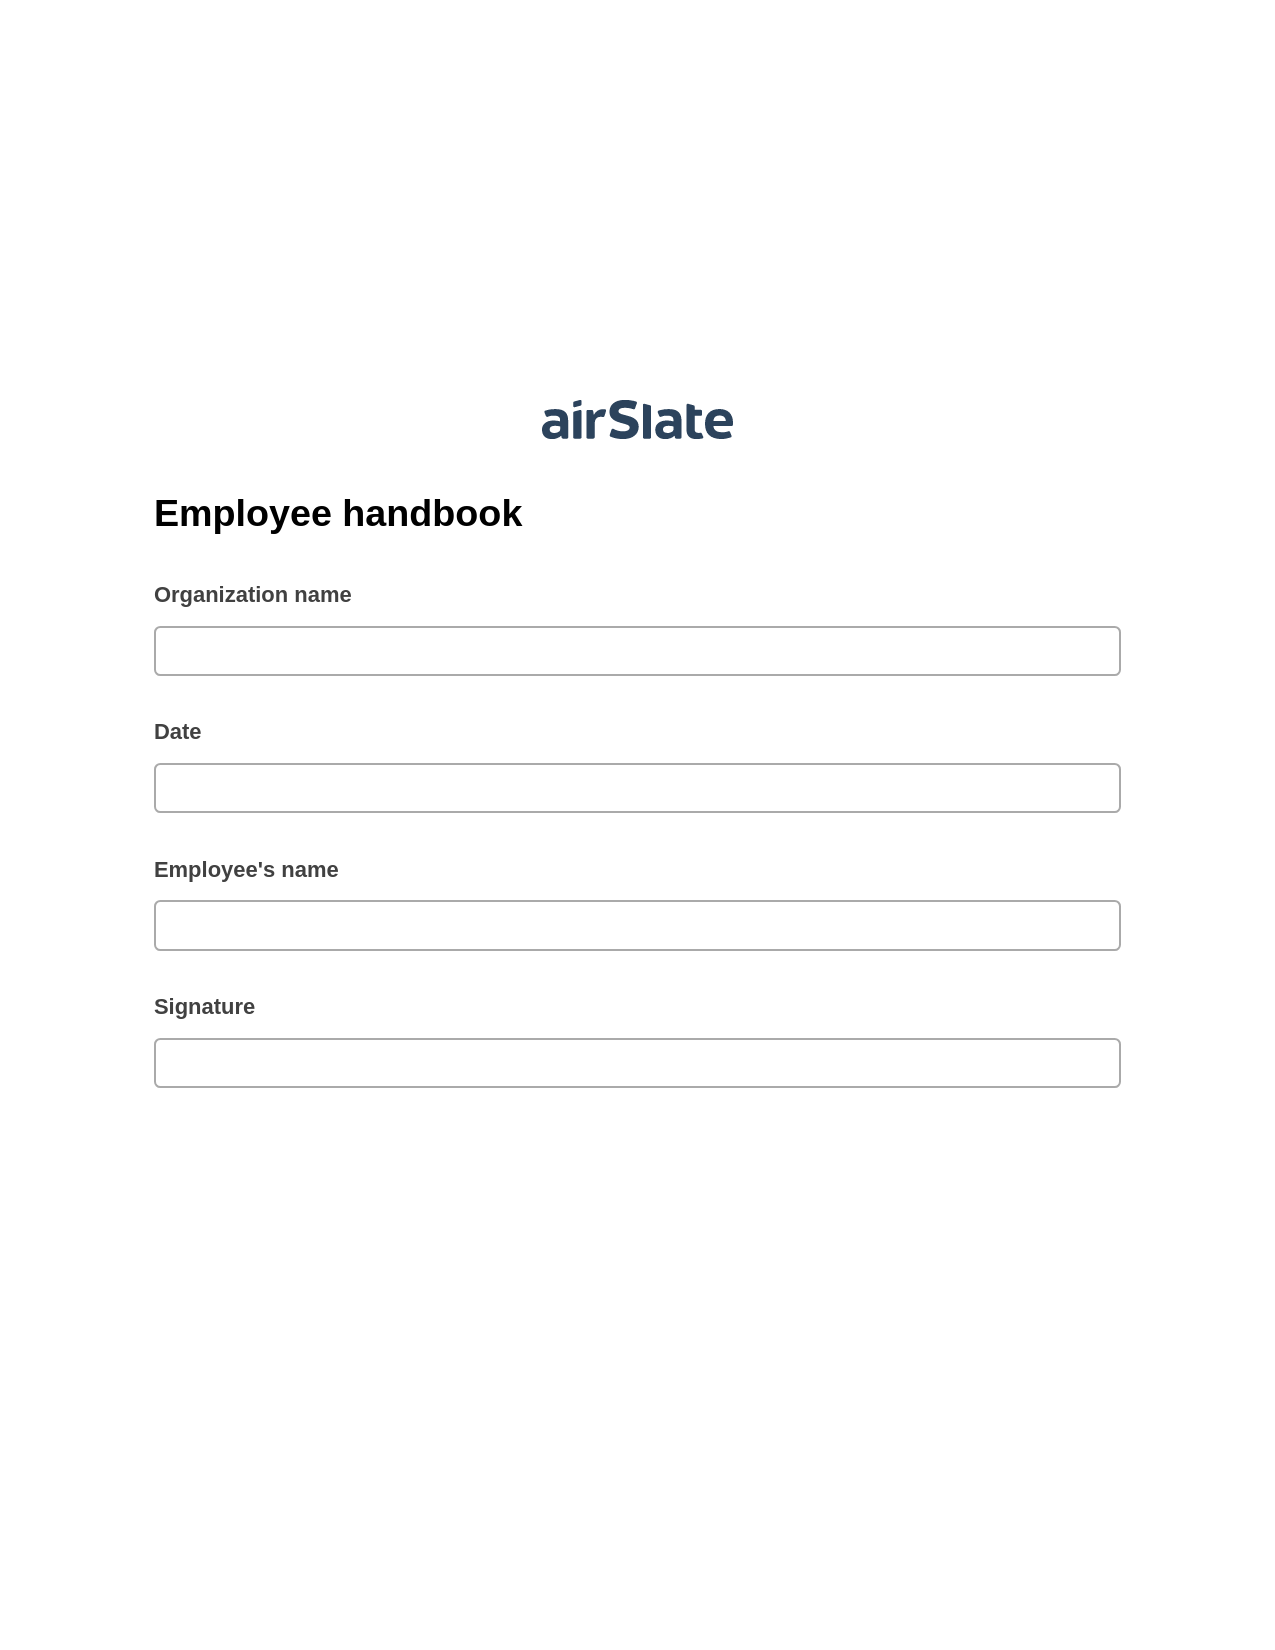 Employee handbook Pre-fill Dropdowns from Excel Bot, Send Mailchimp Campaign Bot, Export to NetSuite Record Bot